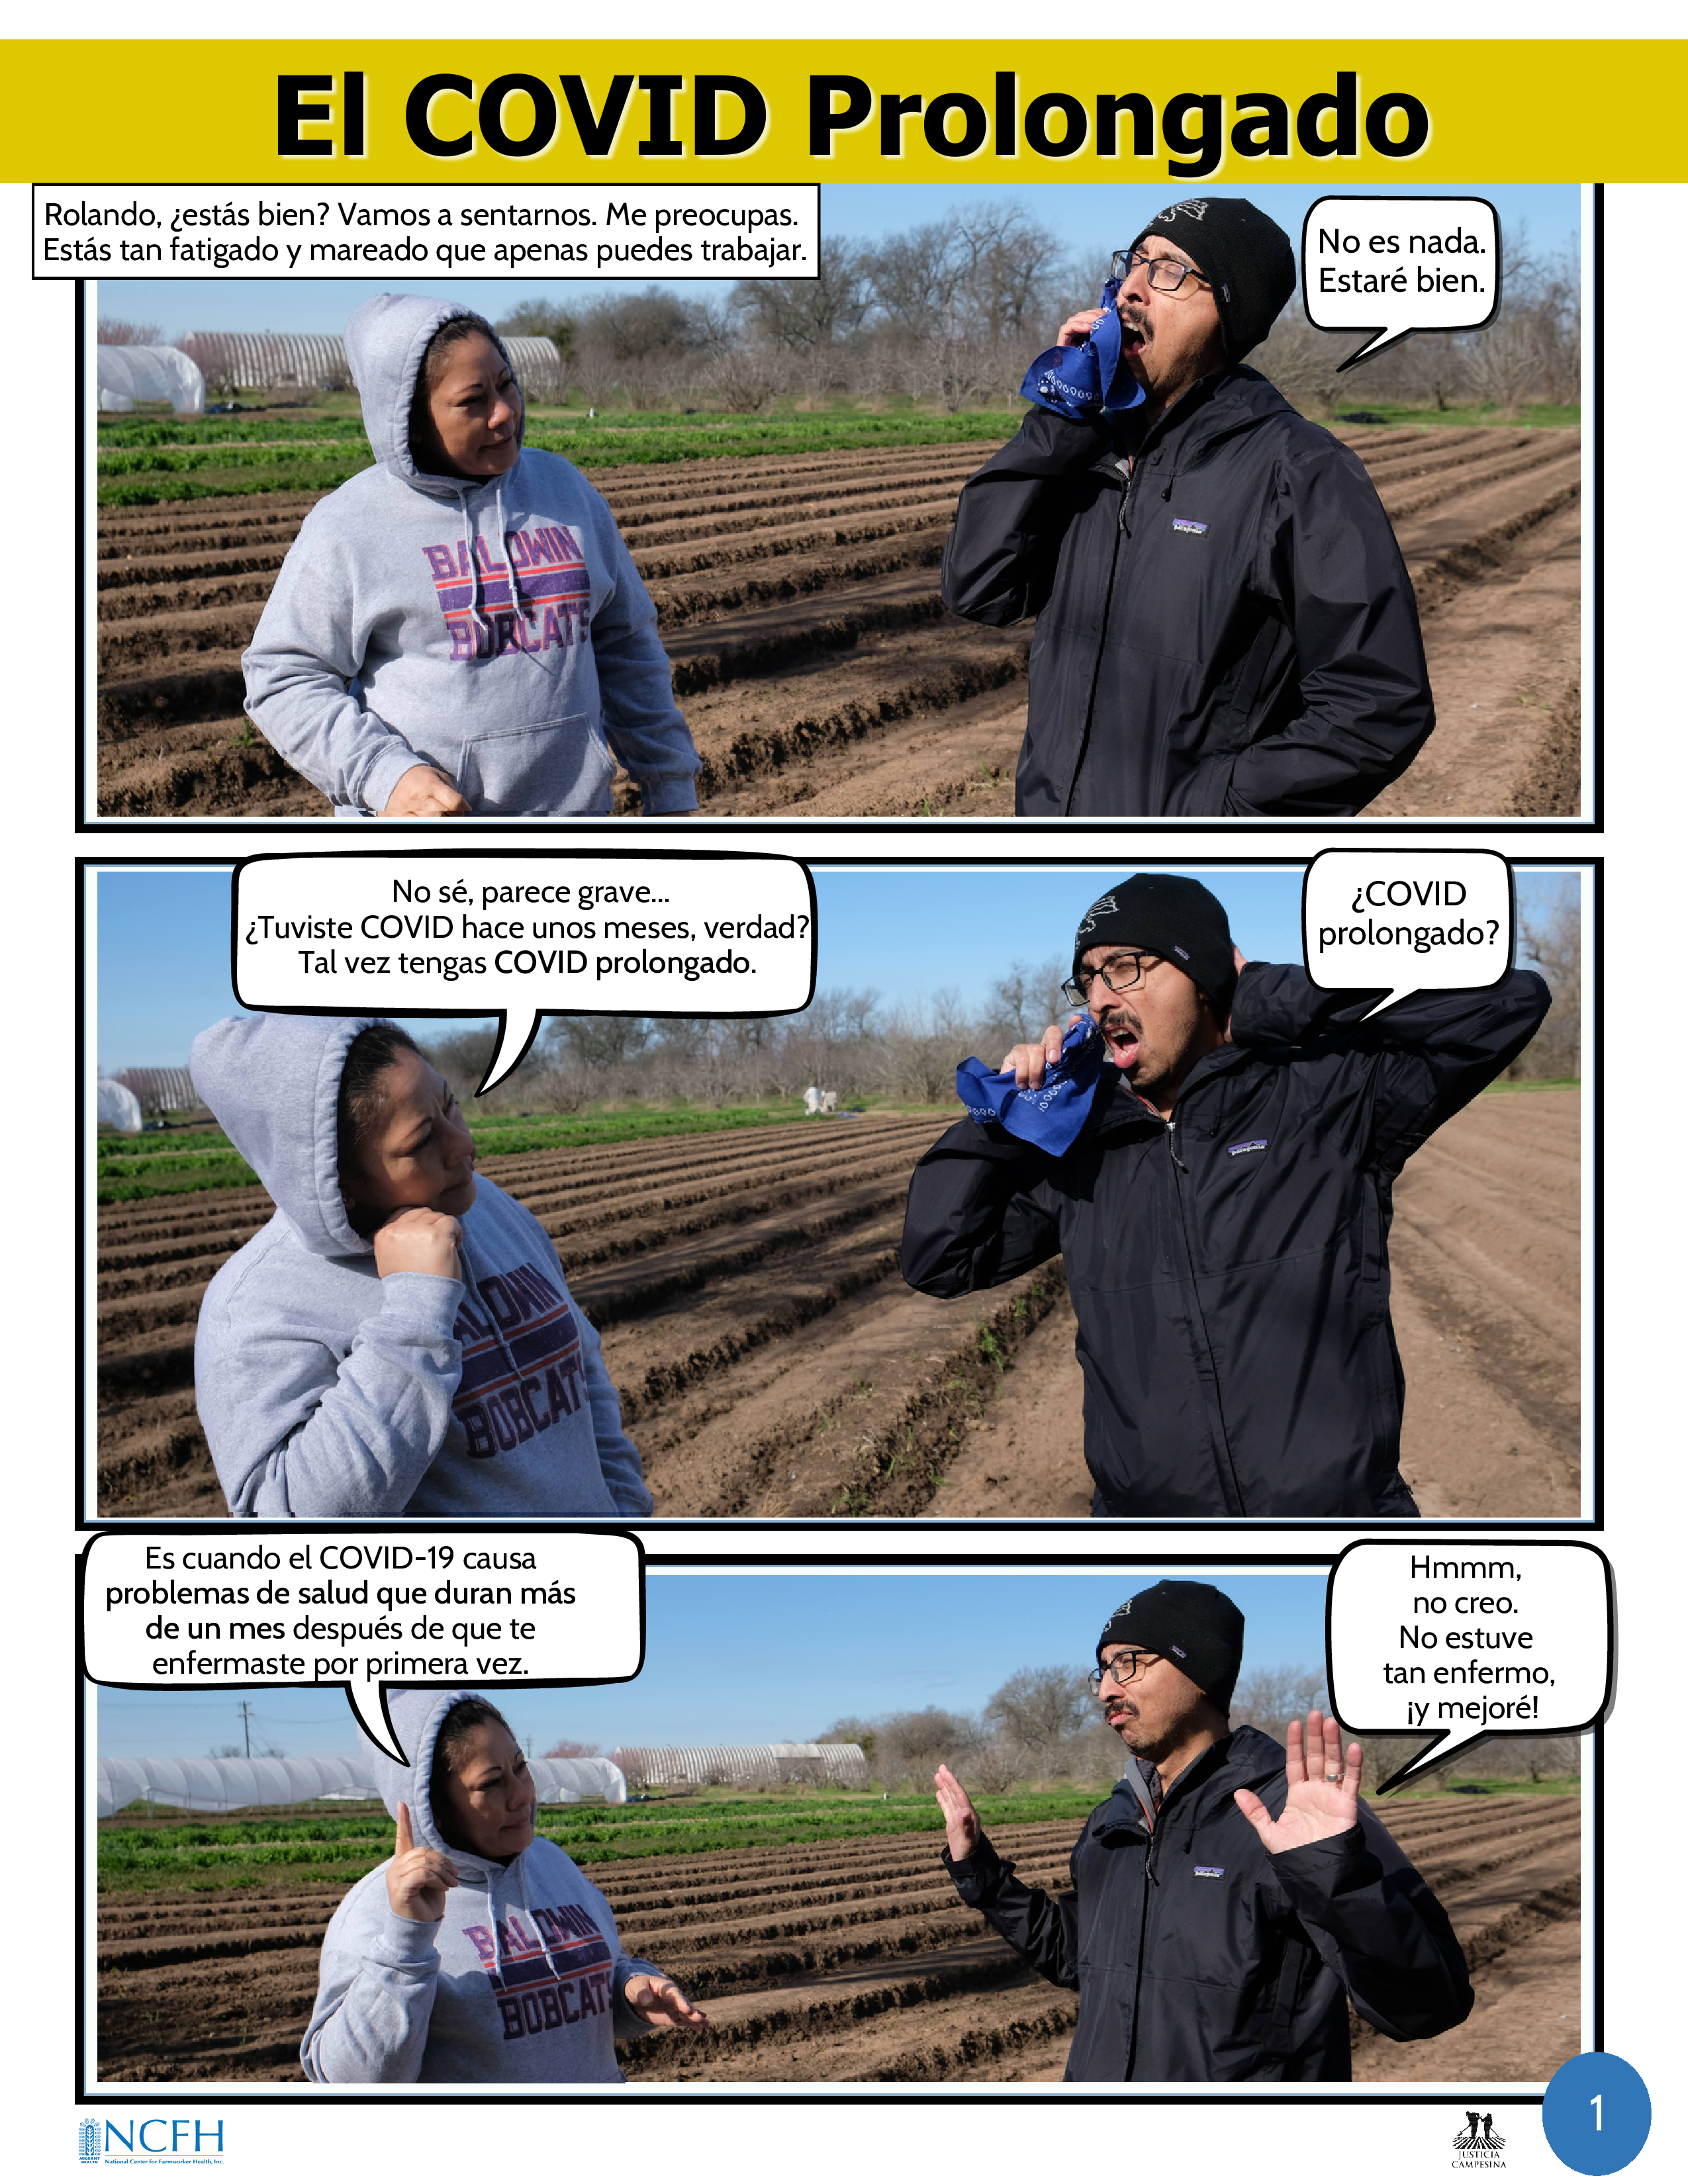 Two farmworkers talk to each other in a field, one of whom is showing signs of fatigue.